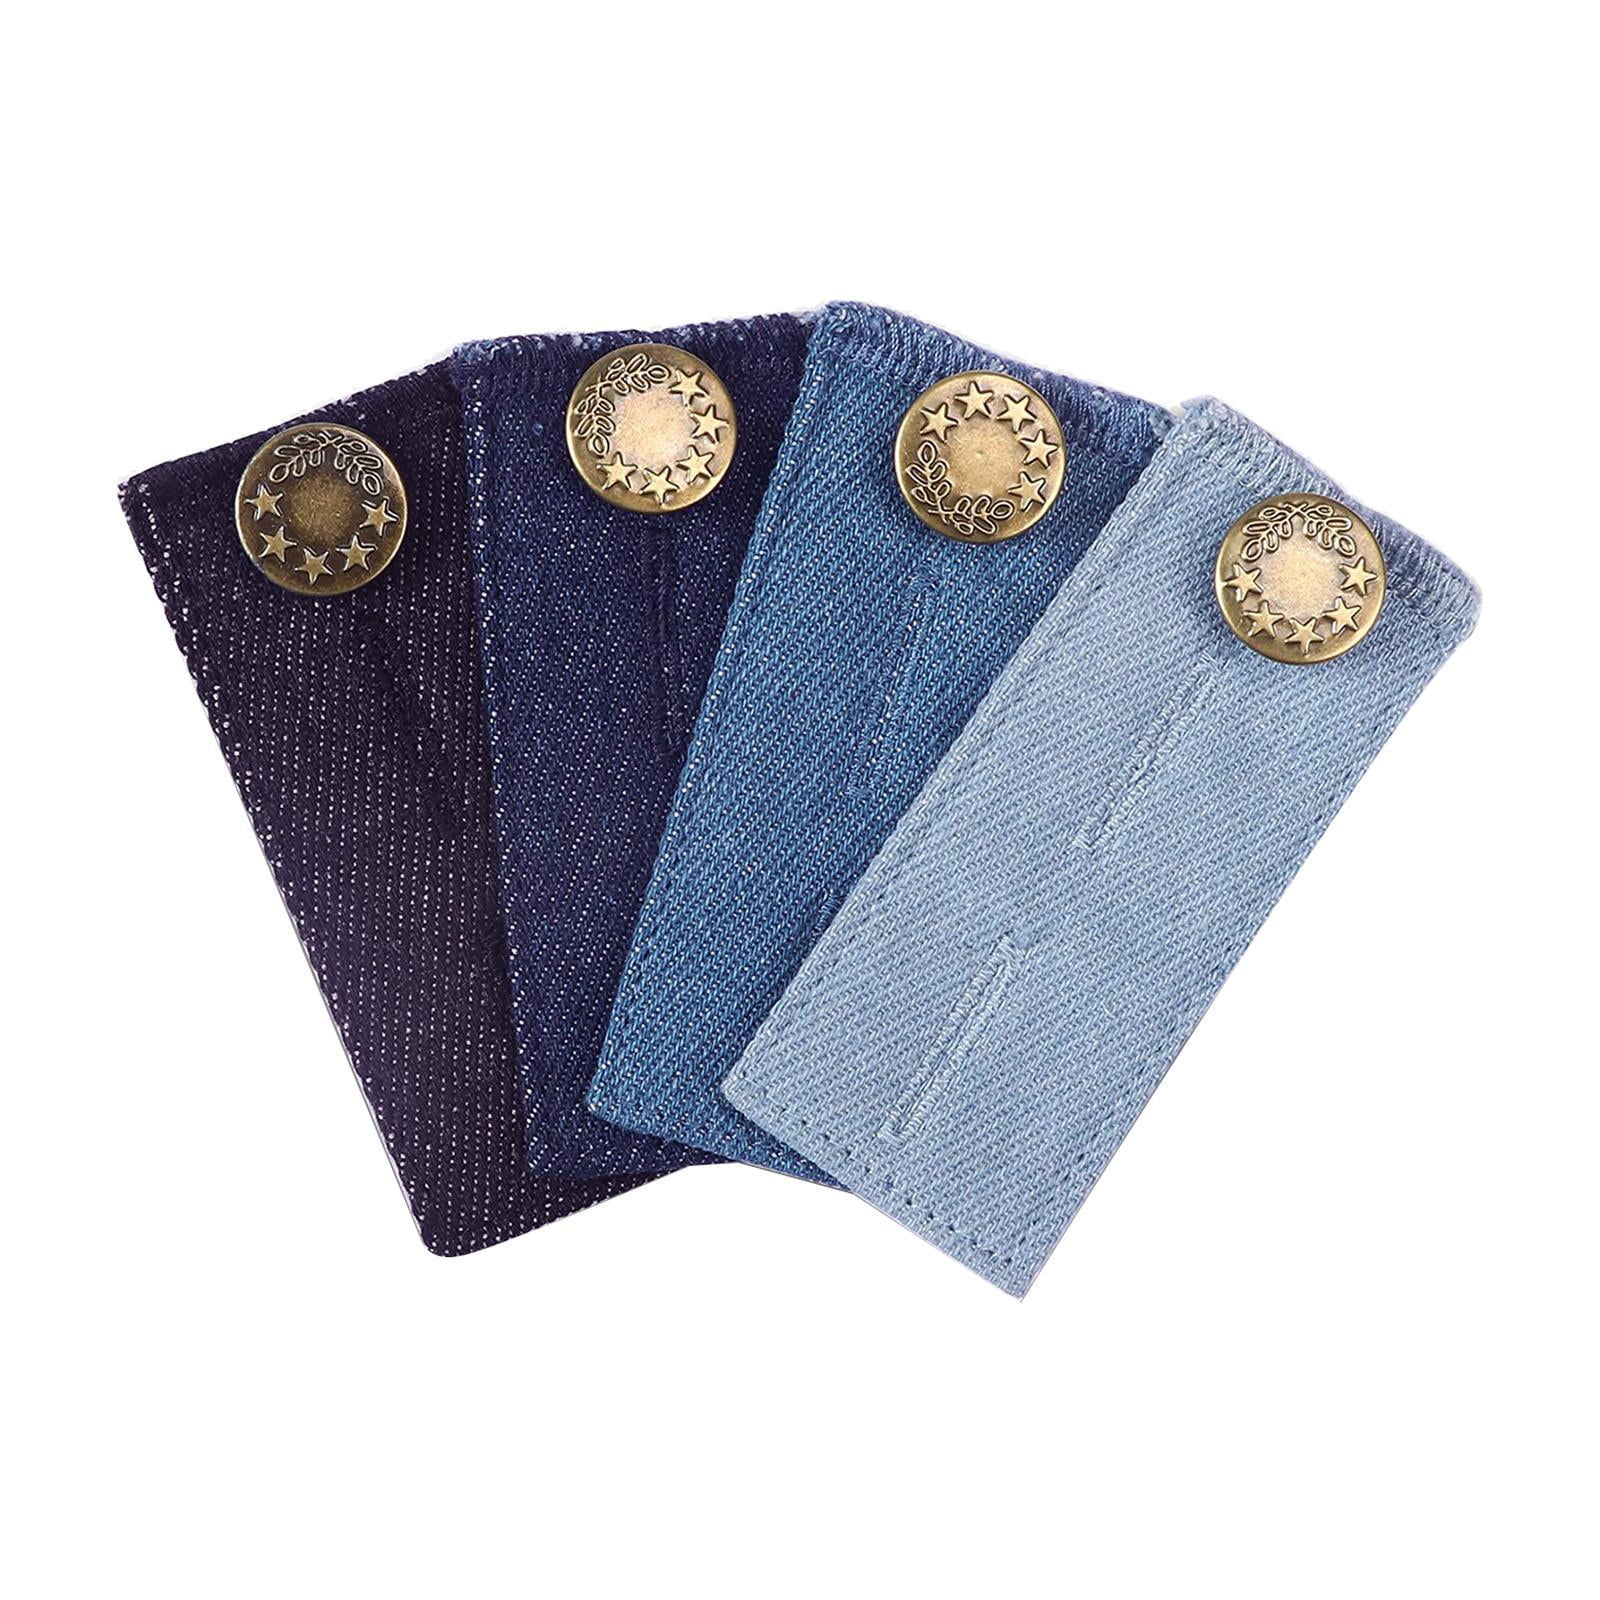  YouOKLight Button Extenders for Jeans, 12 Pcs Jean